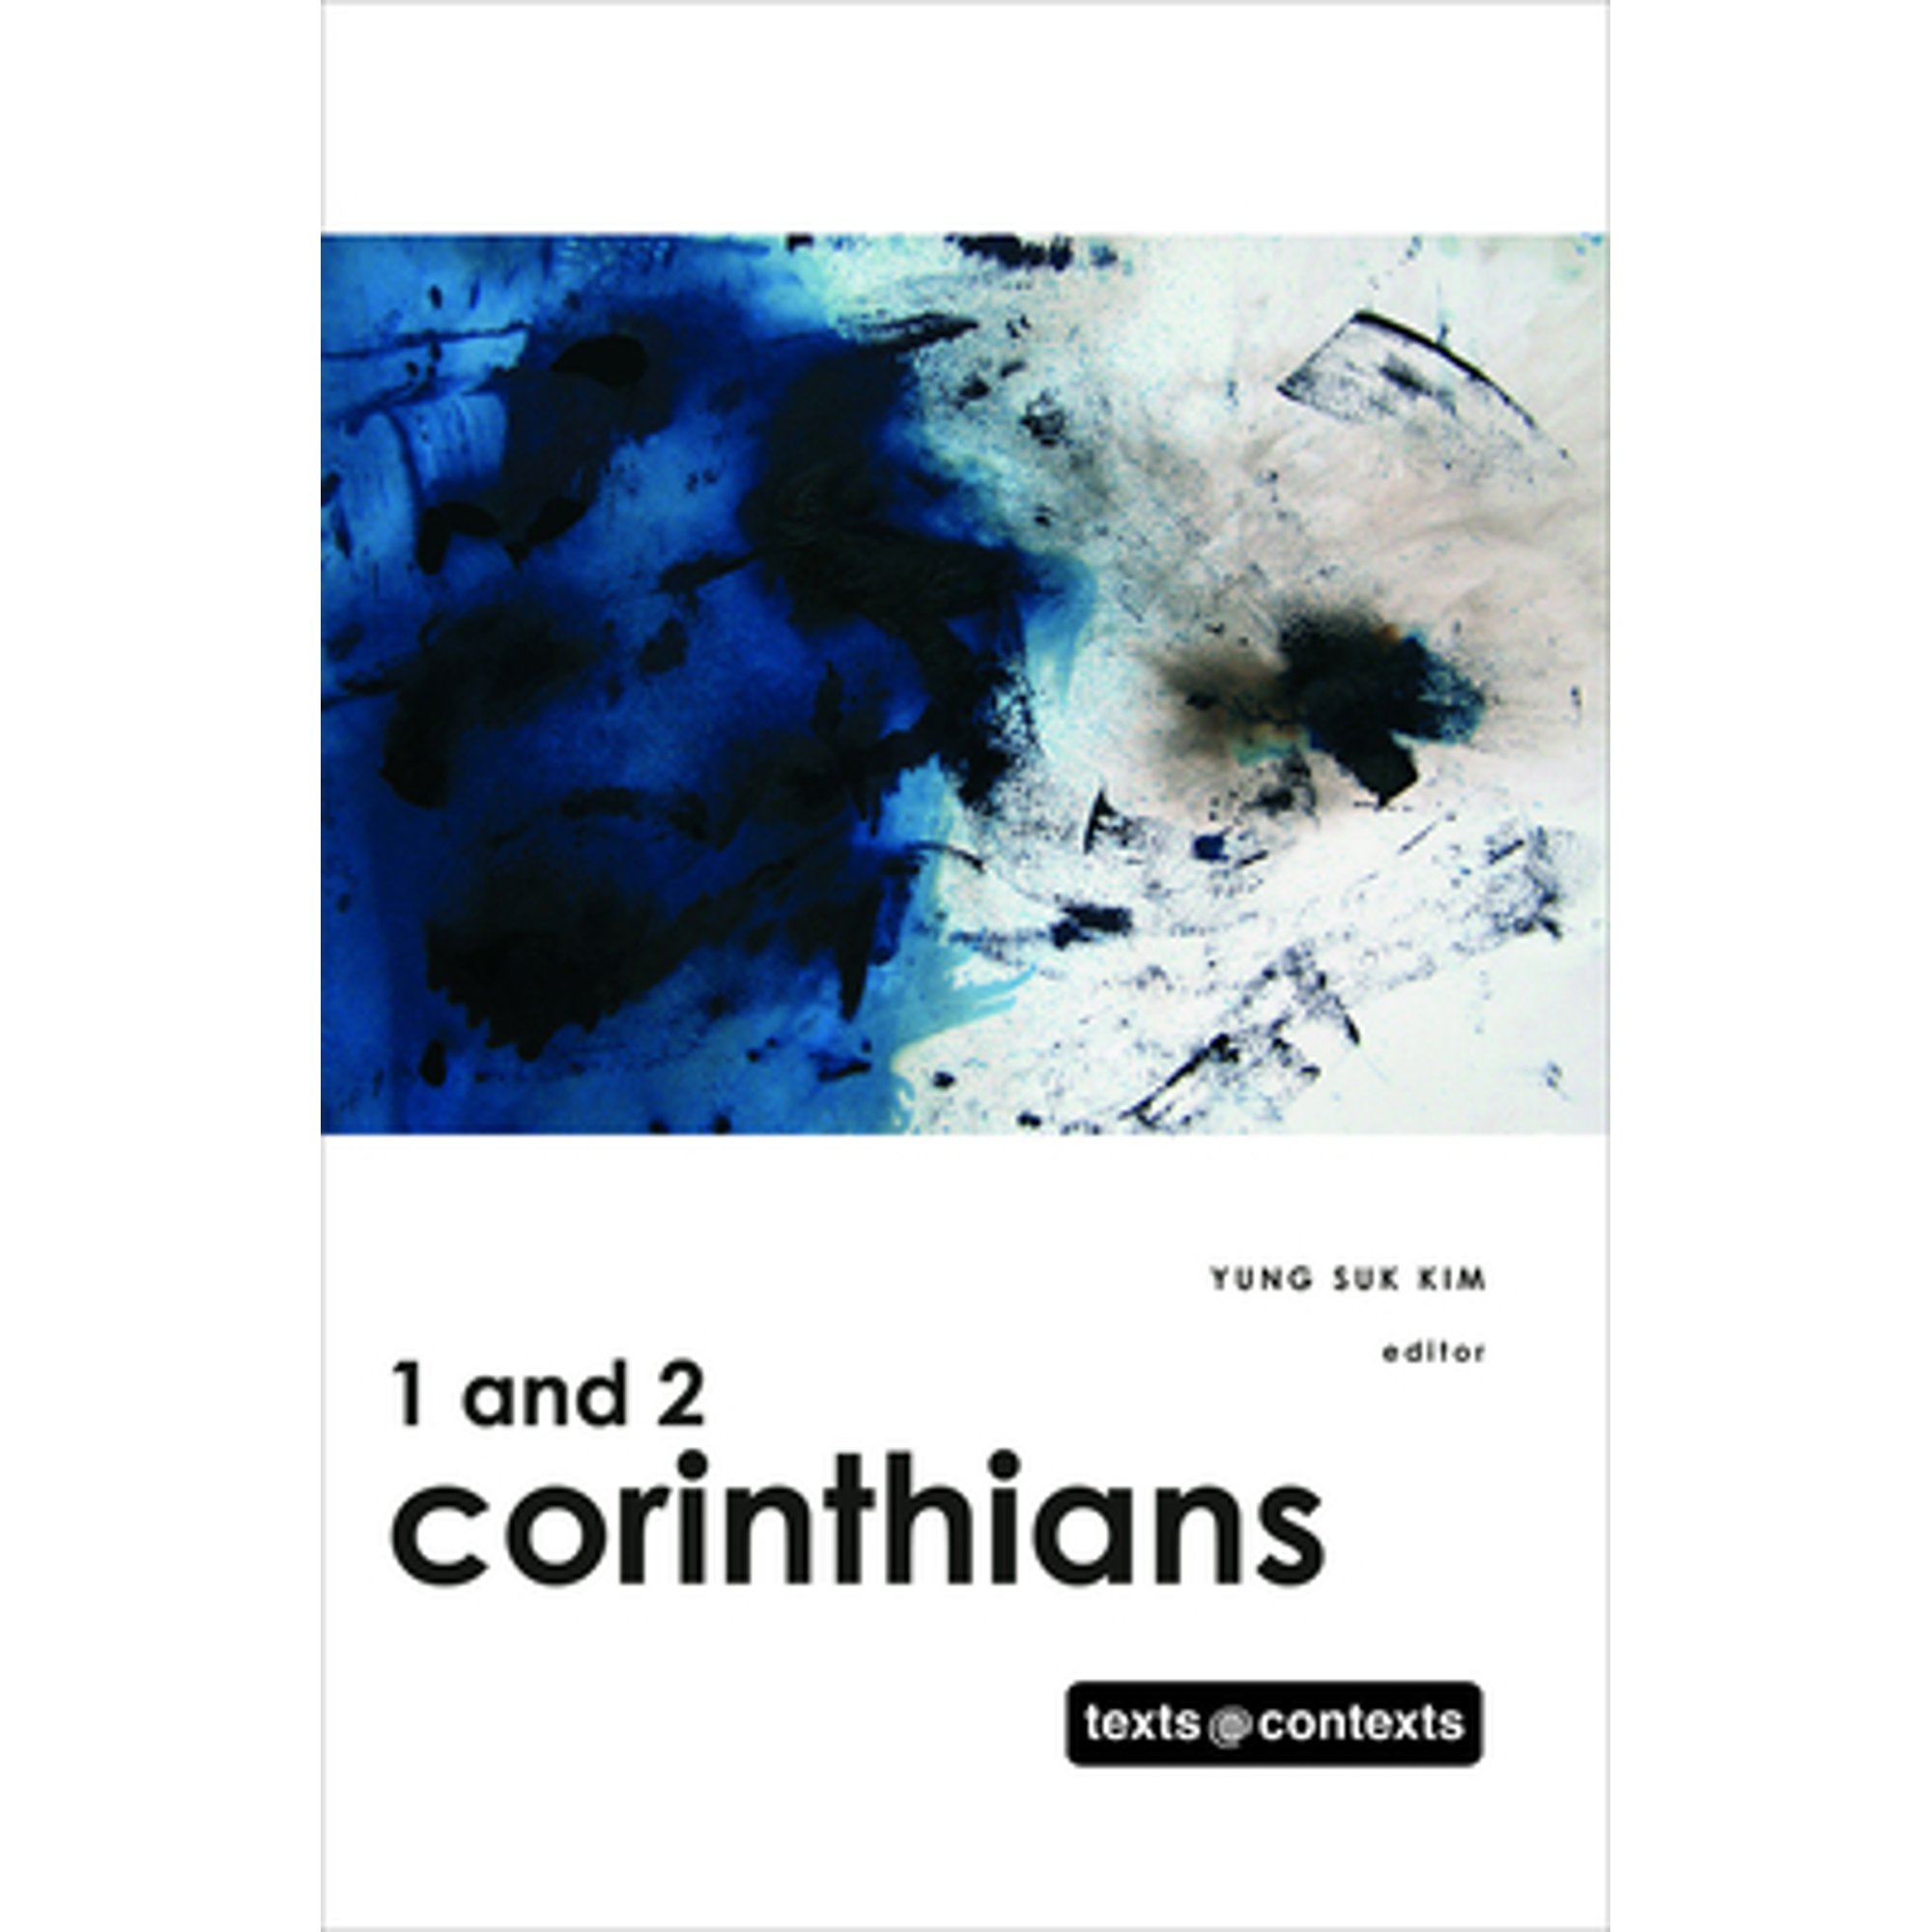 Pre-Owned 1 and 2 Corinthians: Texts @ Contexts Series (Hardcover 9780800699352) by Yung Suk Kim